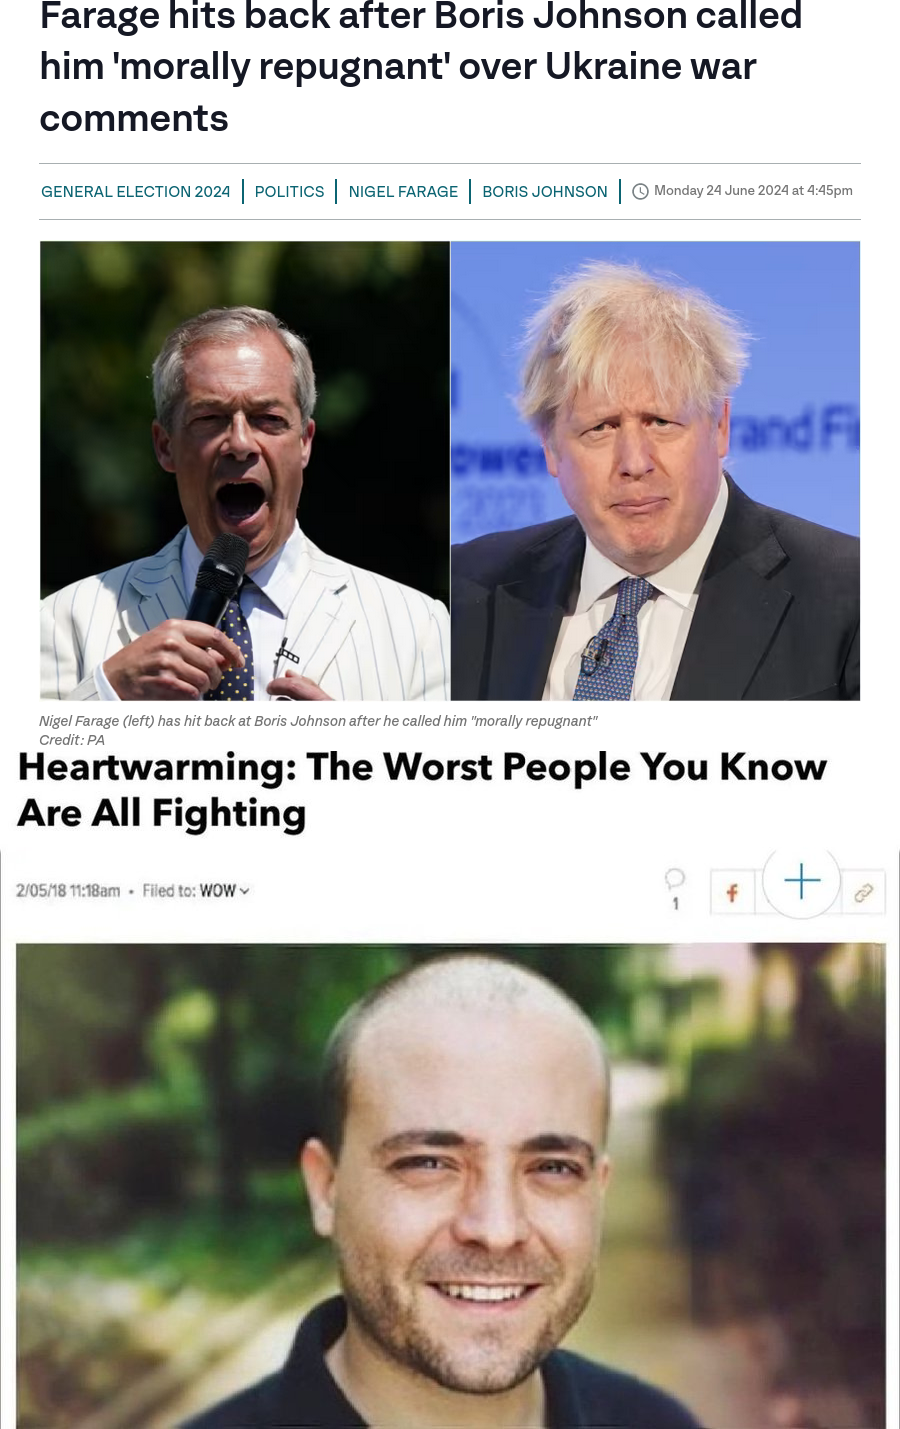 ITV article titled 'Farage hits back after Boris Johnson called him 'morally repugnant' over Ukraine war comments' captioned with a parady of an Onion article titled 'Heartwarming: The worst people you know are all fighting'